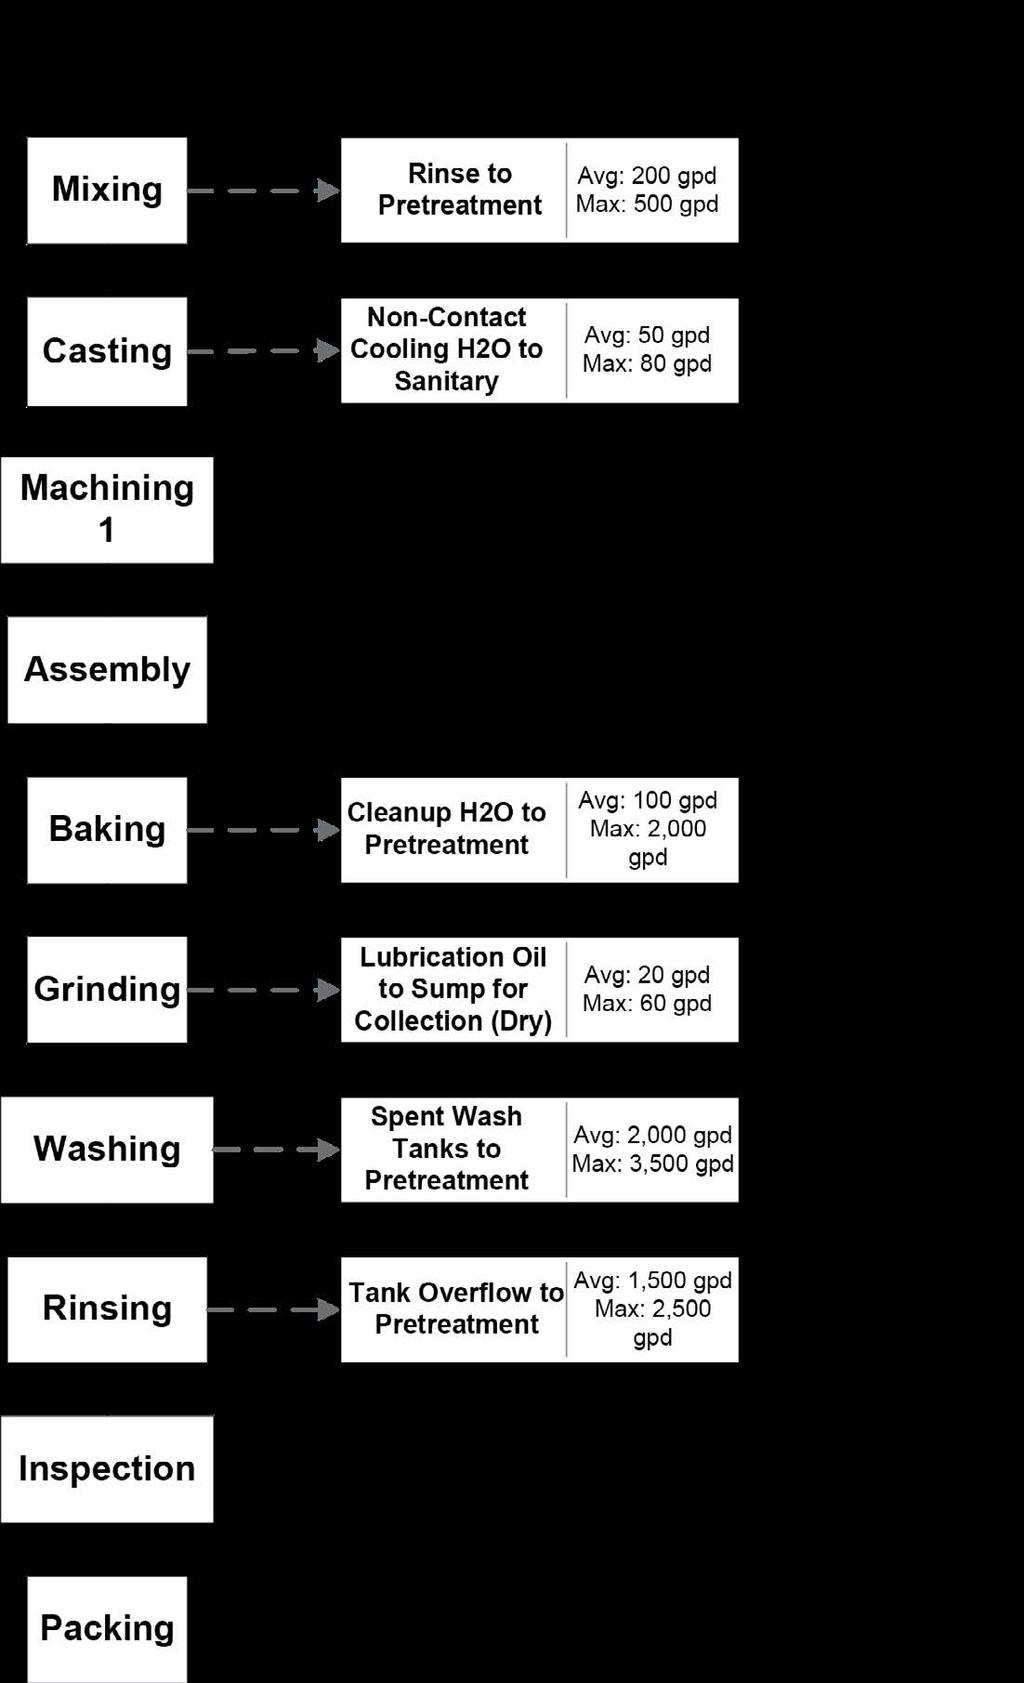 Appendix D: Production Flow Diagram - Workflow of Products or Services The production flow diagram is a flowchart that illustrates the industrial processes from raw products coming in, through